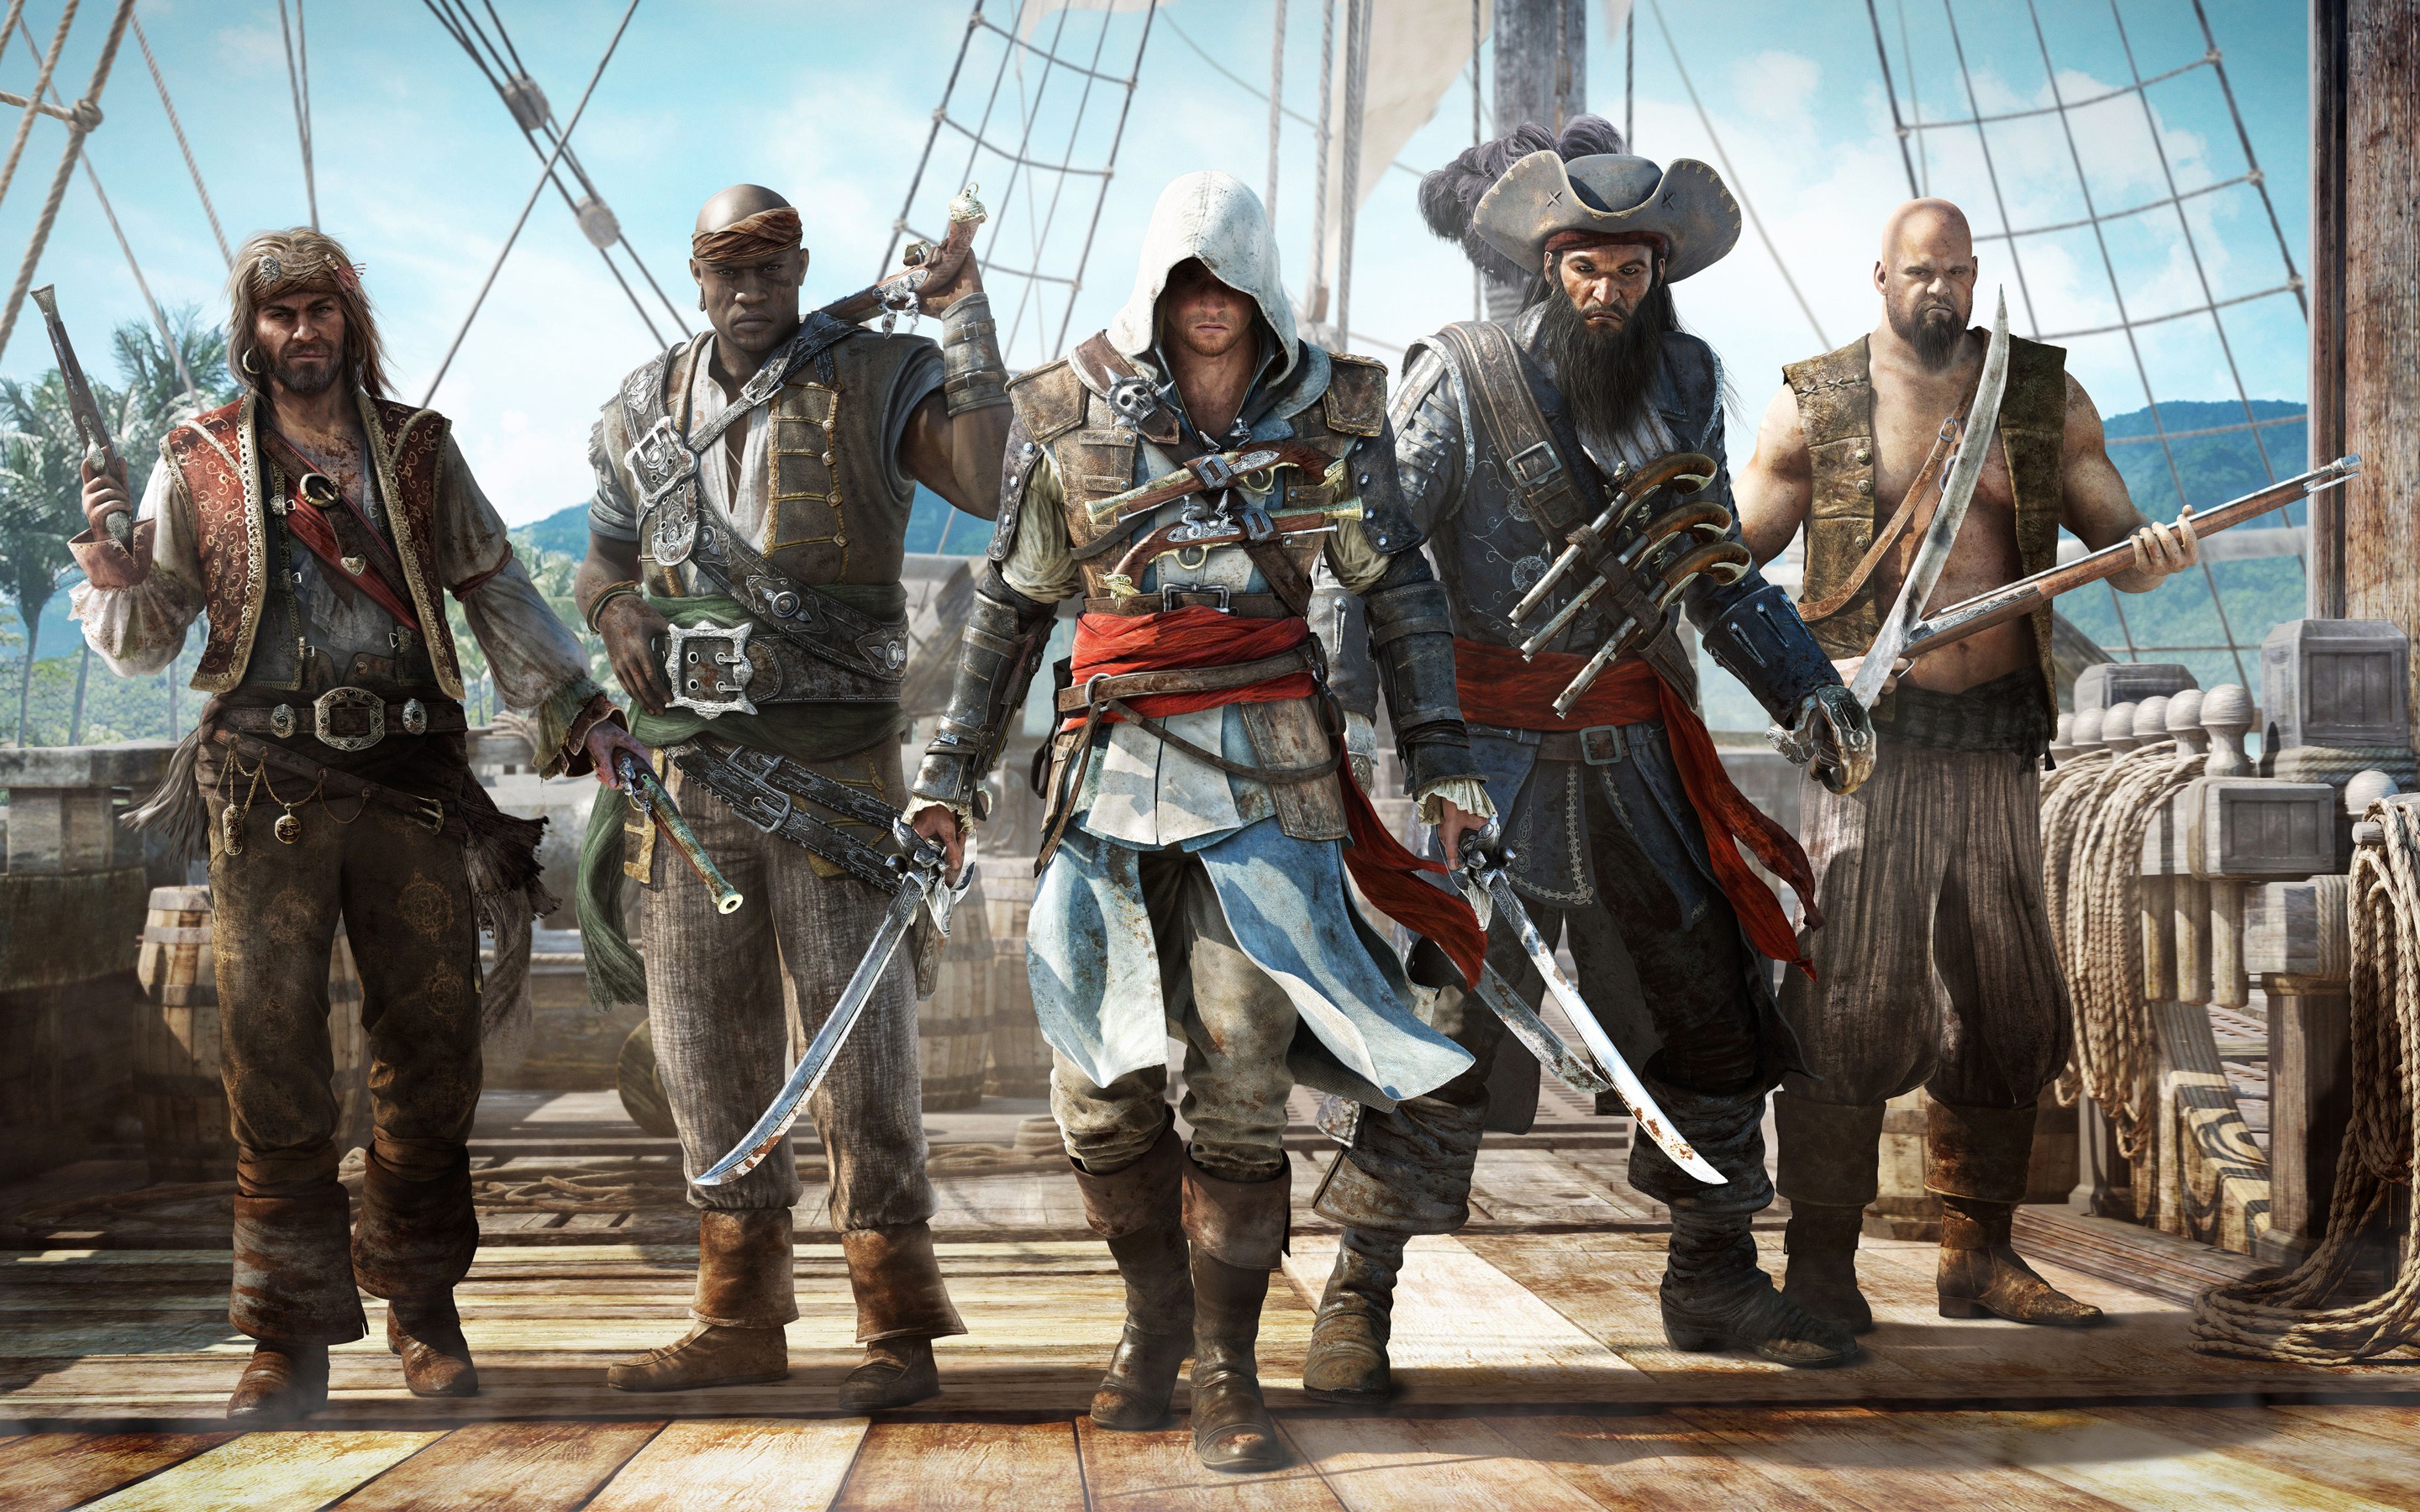 General 2880x1800 Assassin's Creed video games Assassin's Creed: Black Flag PC gaming video game men video game characters video game art